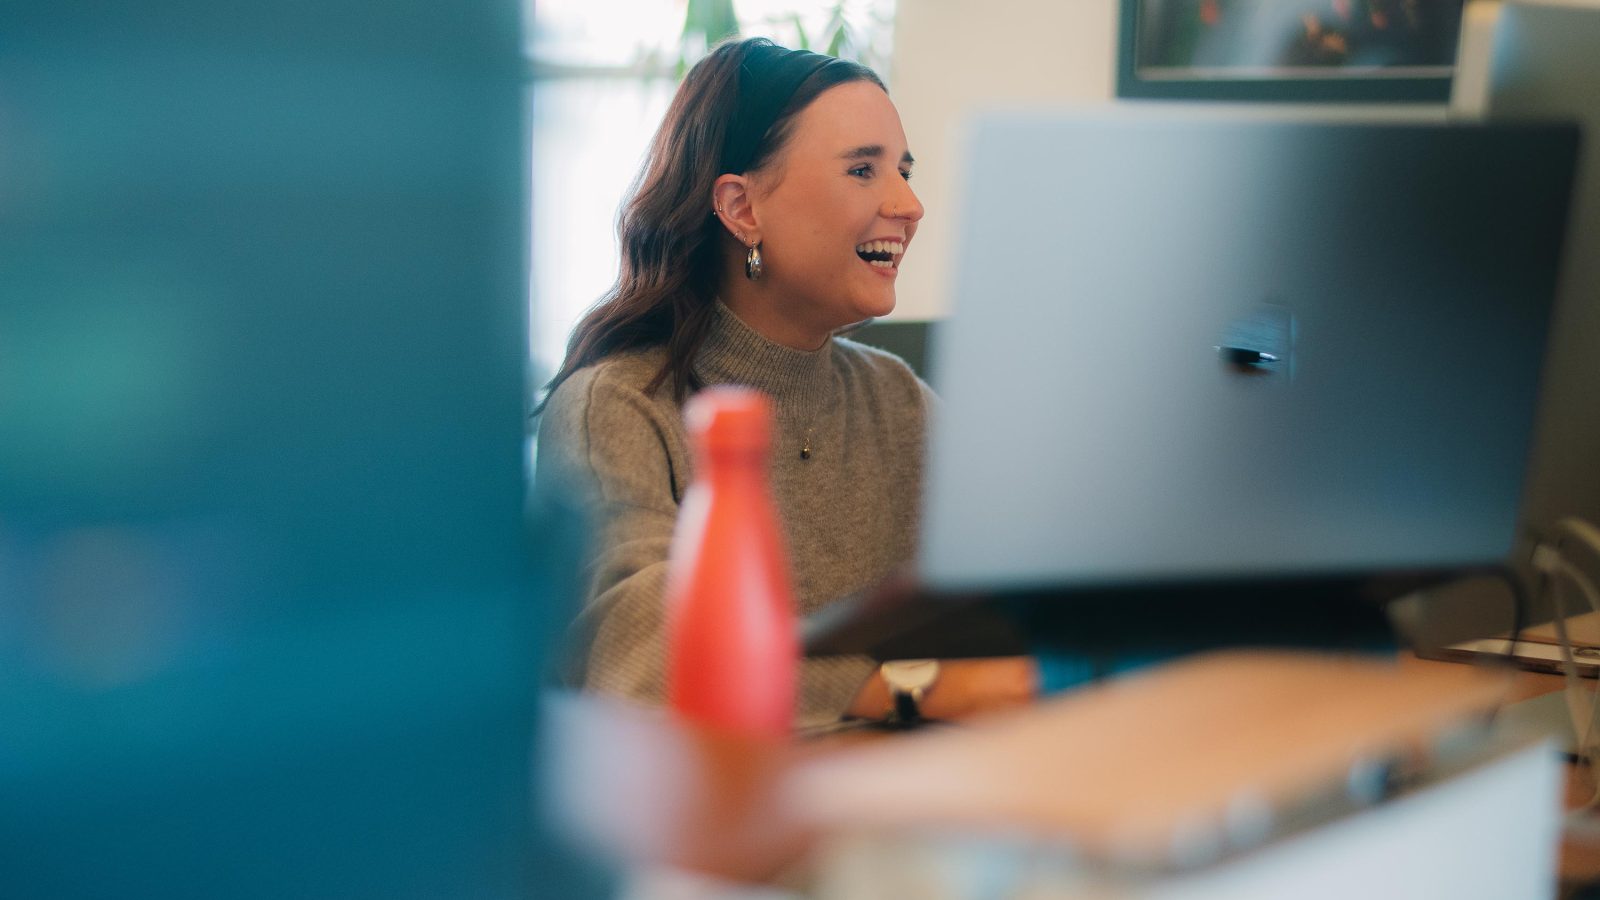 A smiling woman in a grey sweater works at a desktop computer in a brightly lit office of a Brand Agency UK, with a blurred out bottle in the foreground.